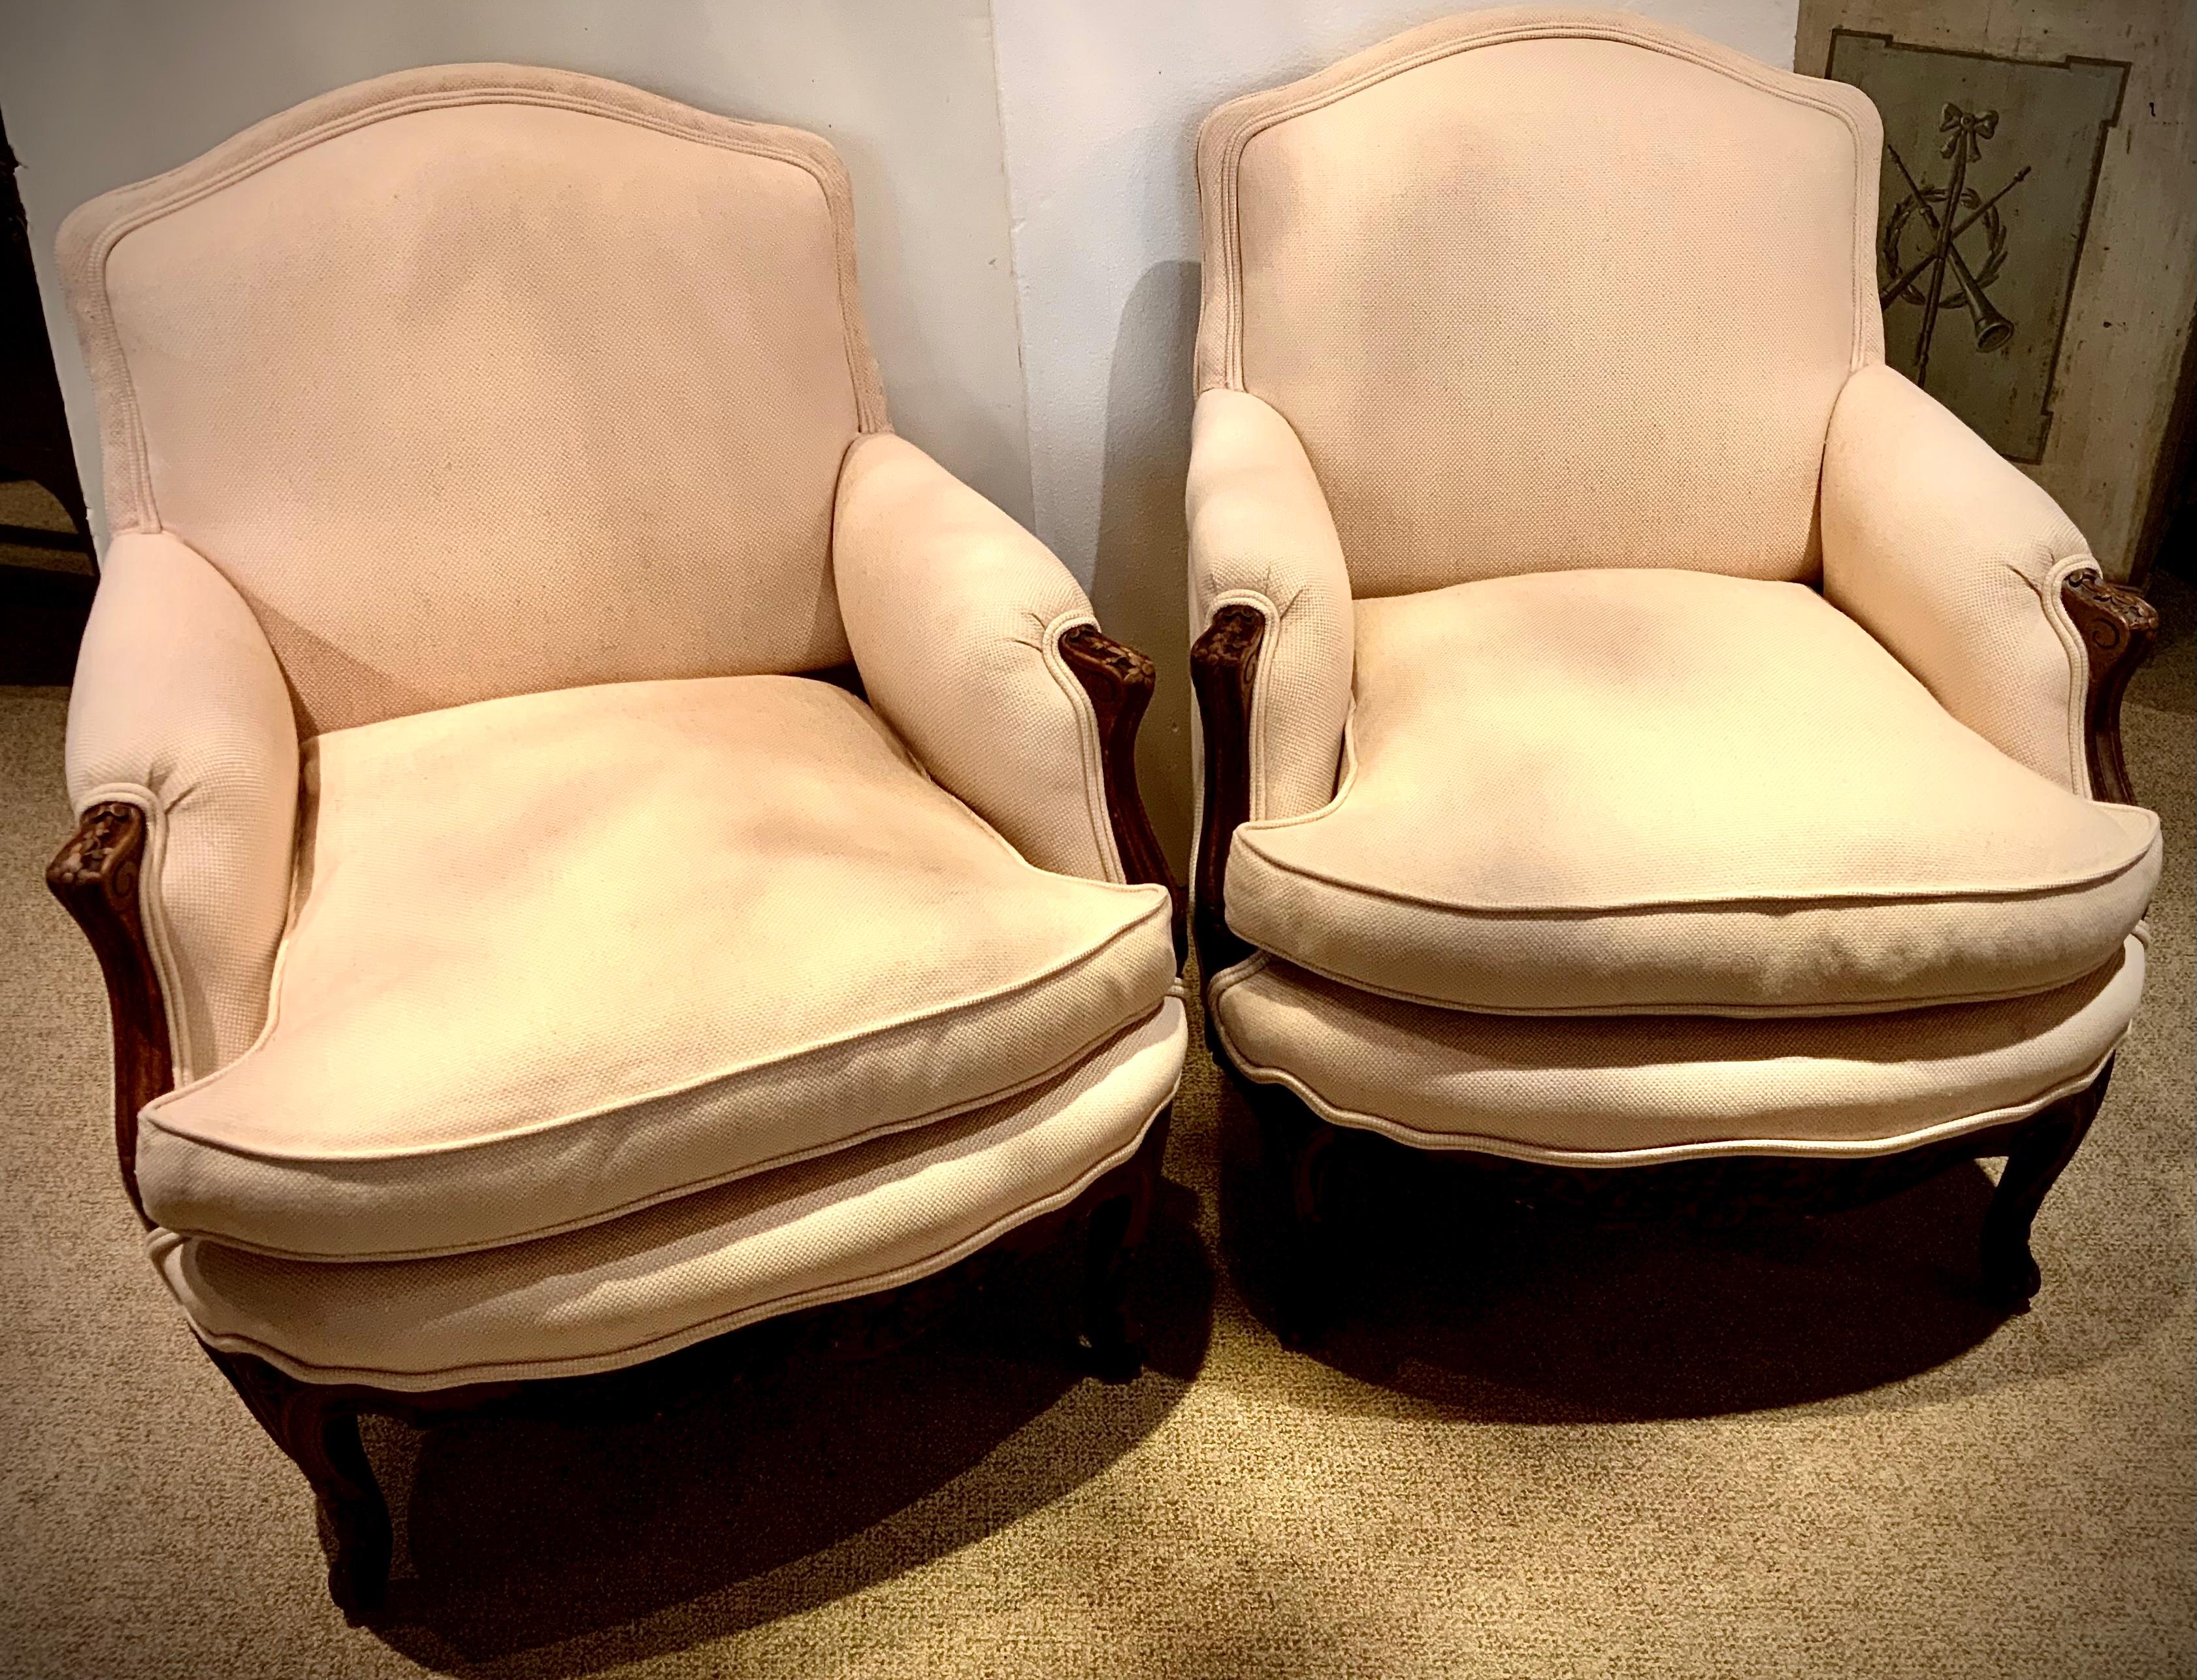 20th Century Pair of French Bergere Chairs, Louis XV-Style in Cream / White Hues For Sale